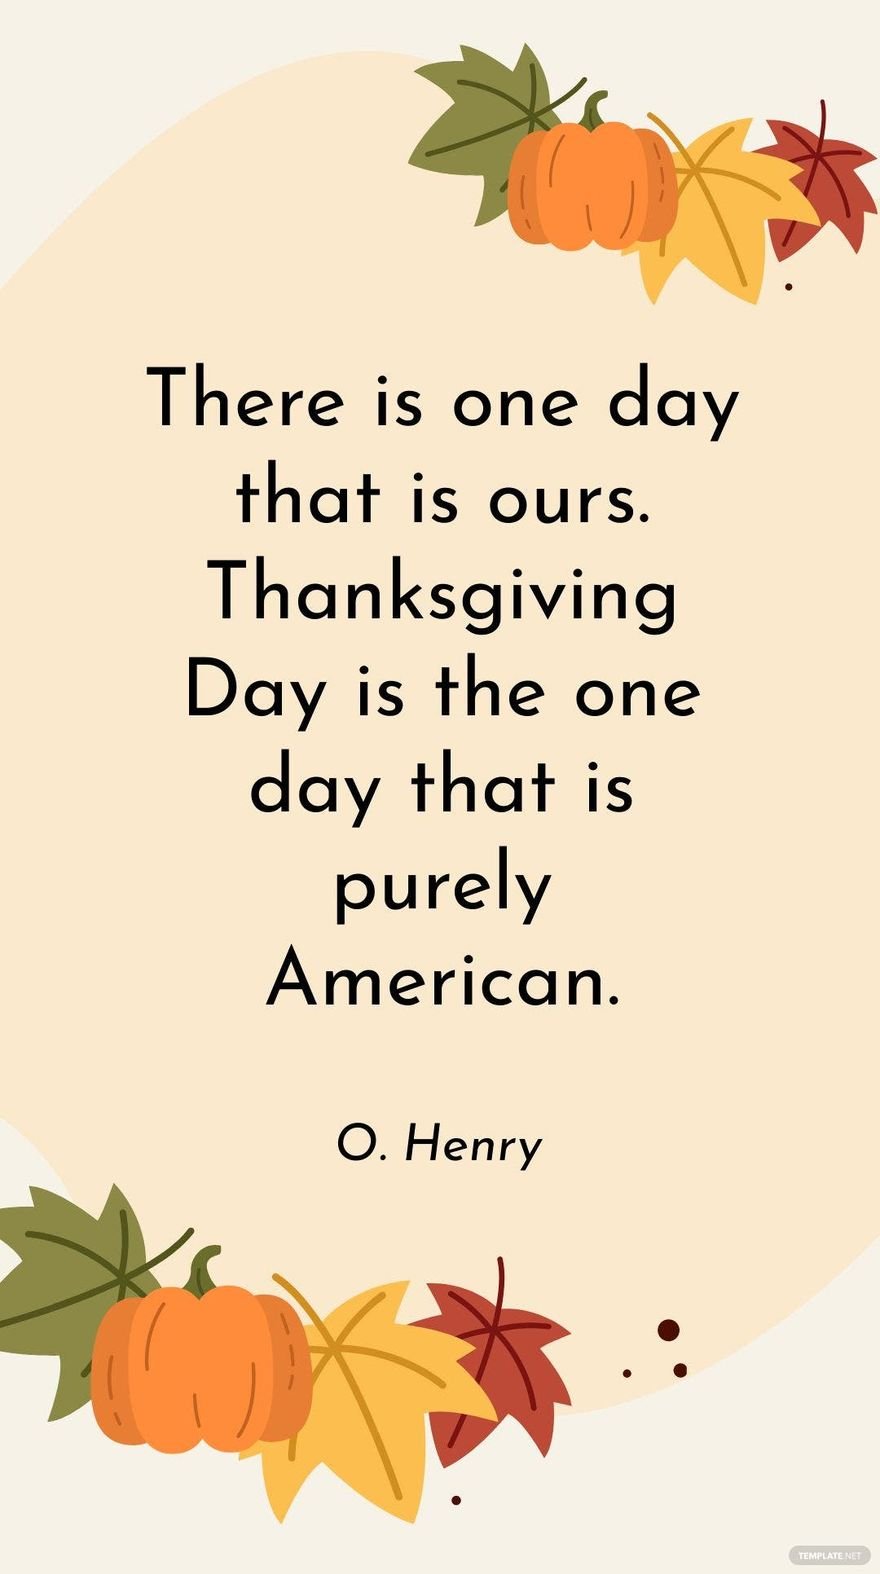 Free O. Henry - There is one day that is ours. Thanksgiving Day is the one day that is purely American. in JPG